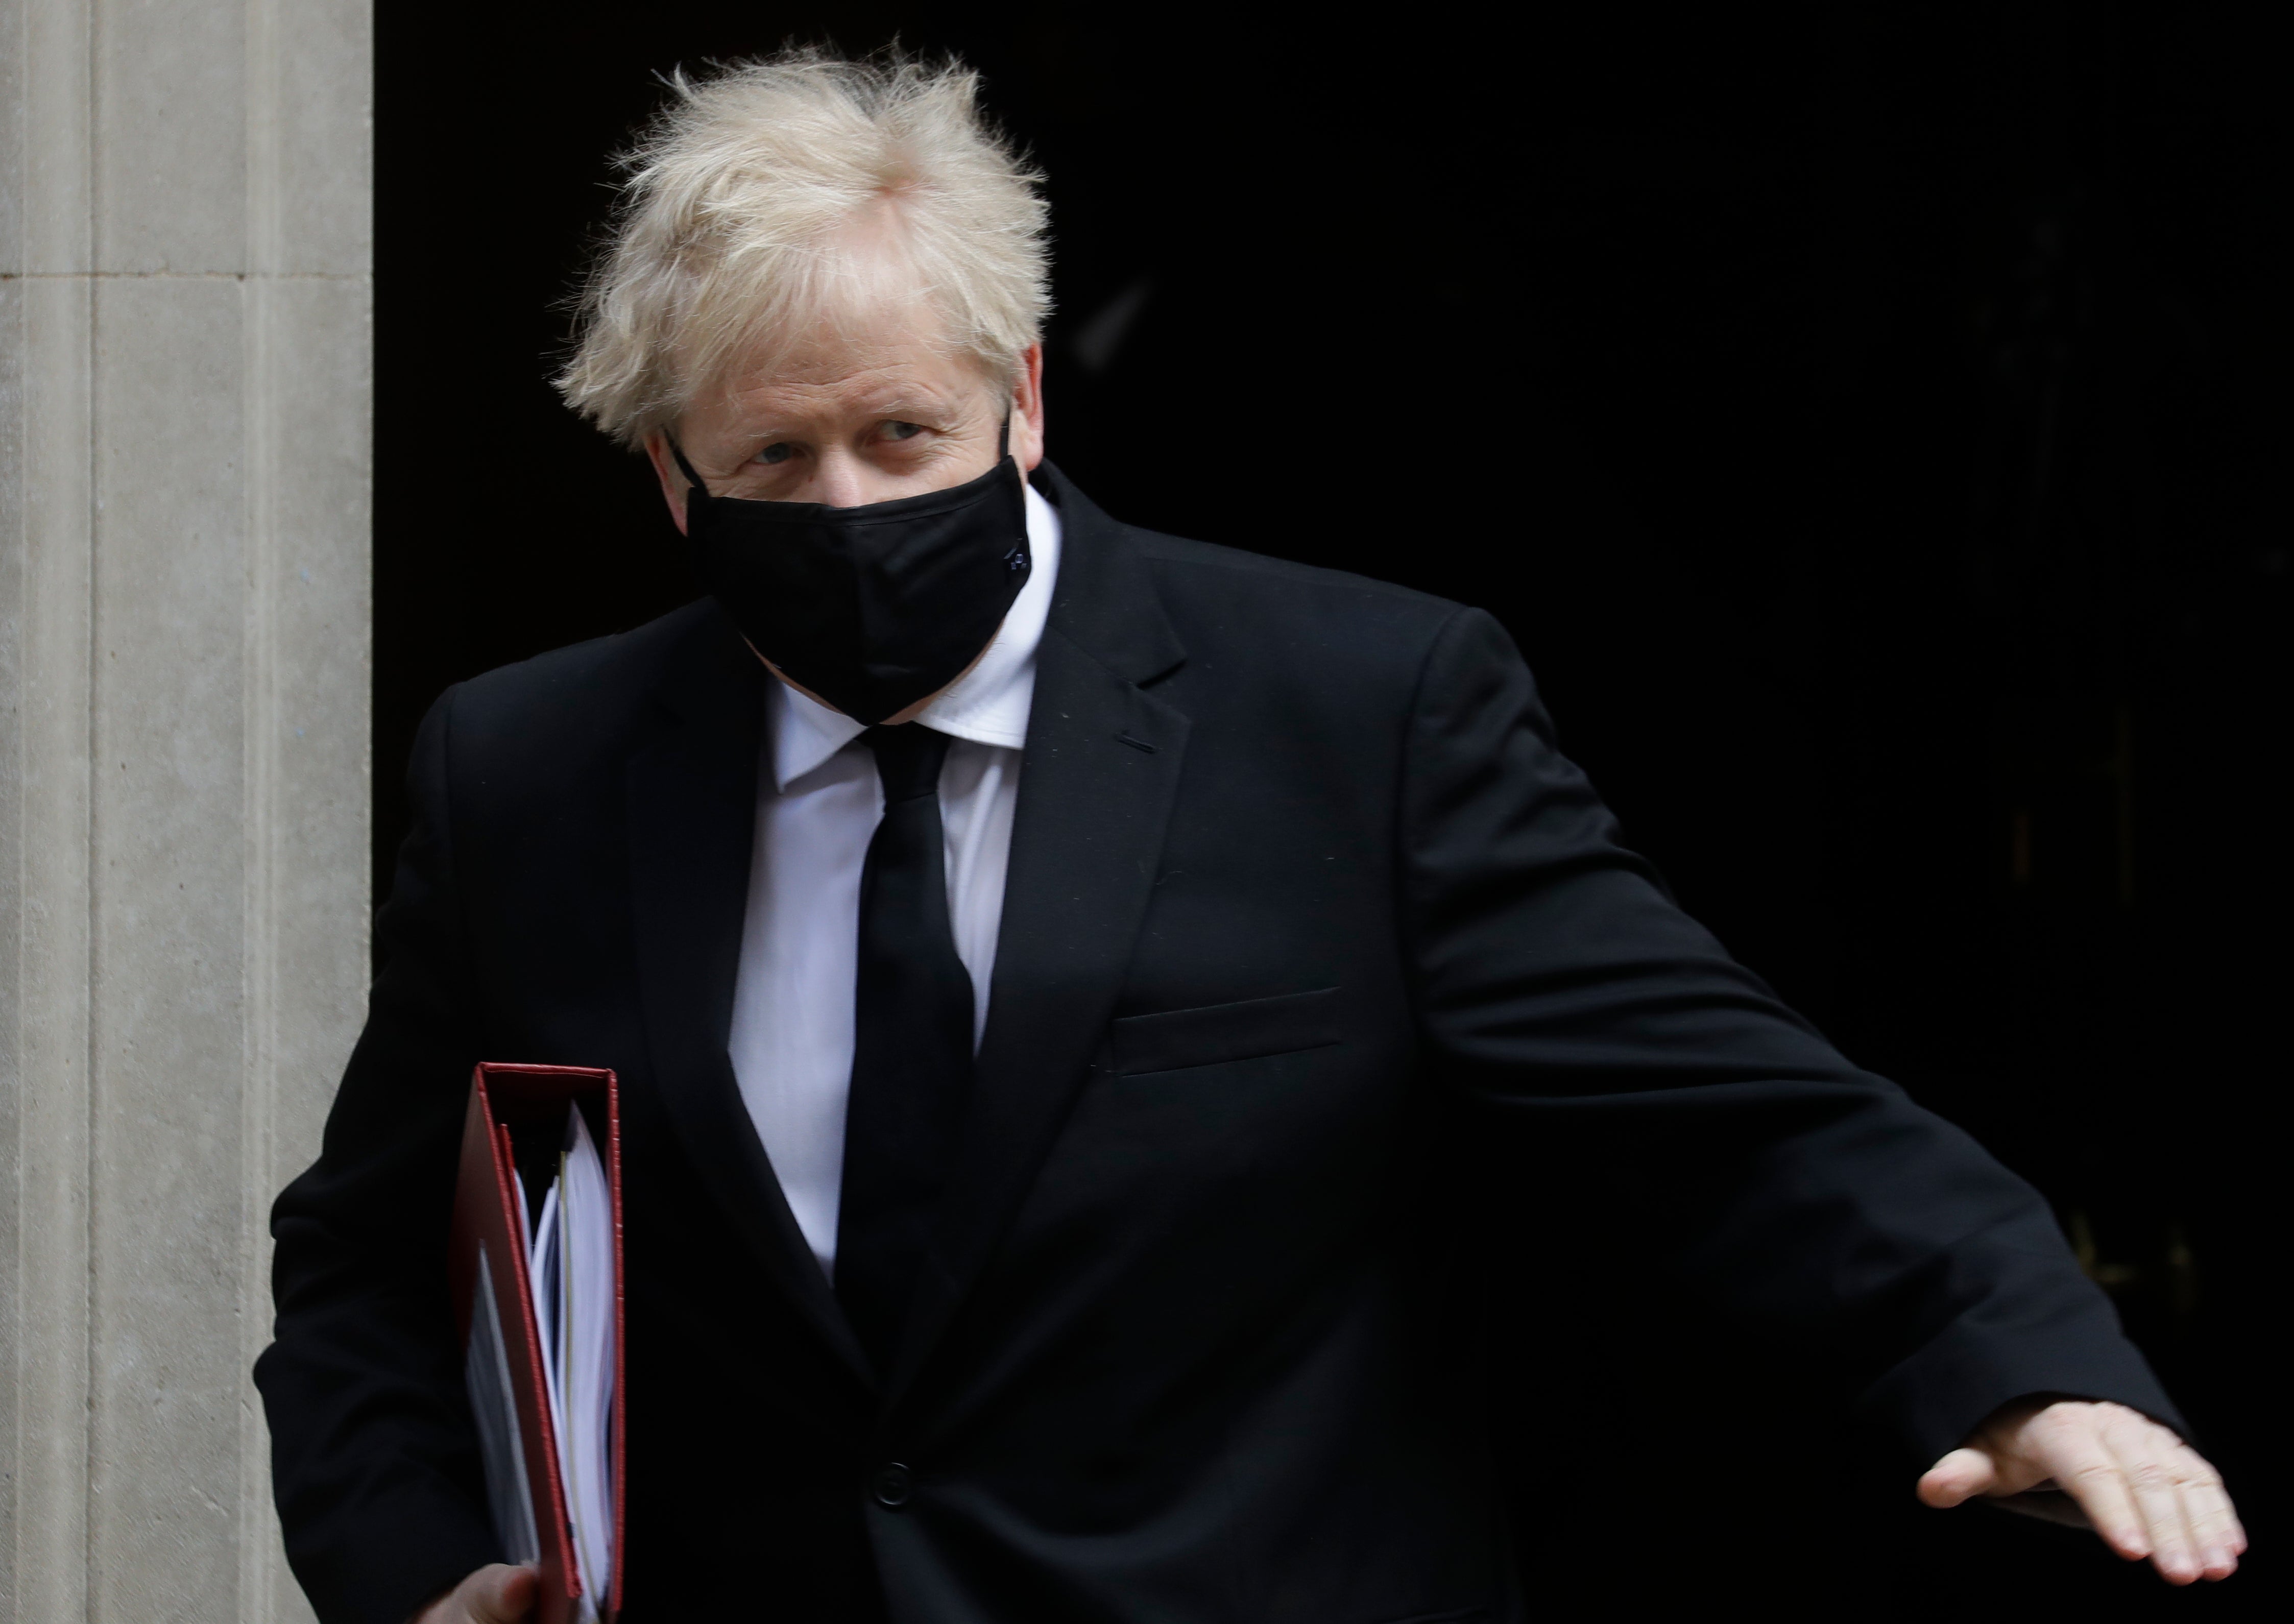 Boris Johnson leaves the building that includes a tastefully refurbished flat